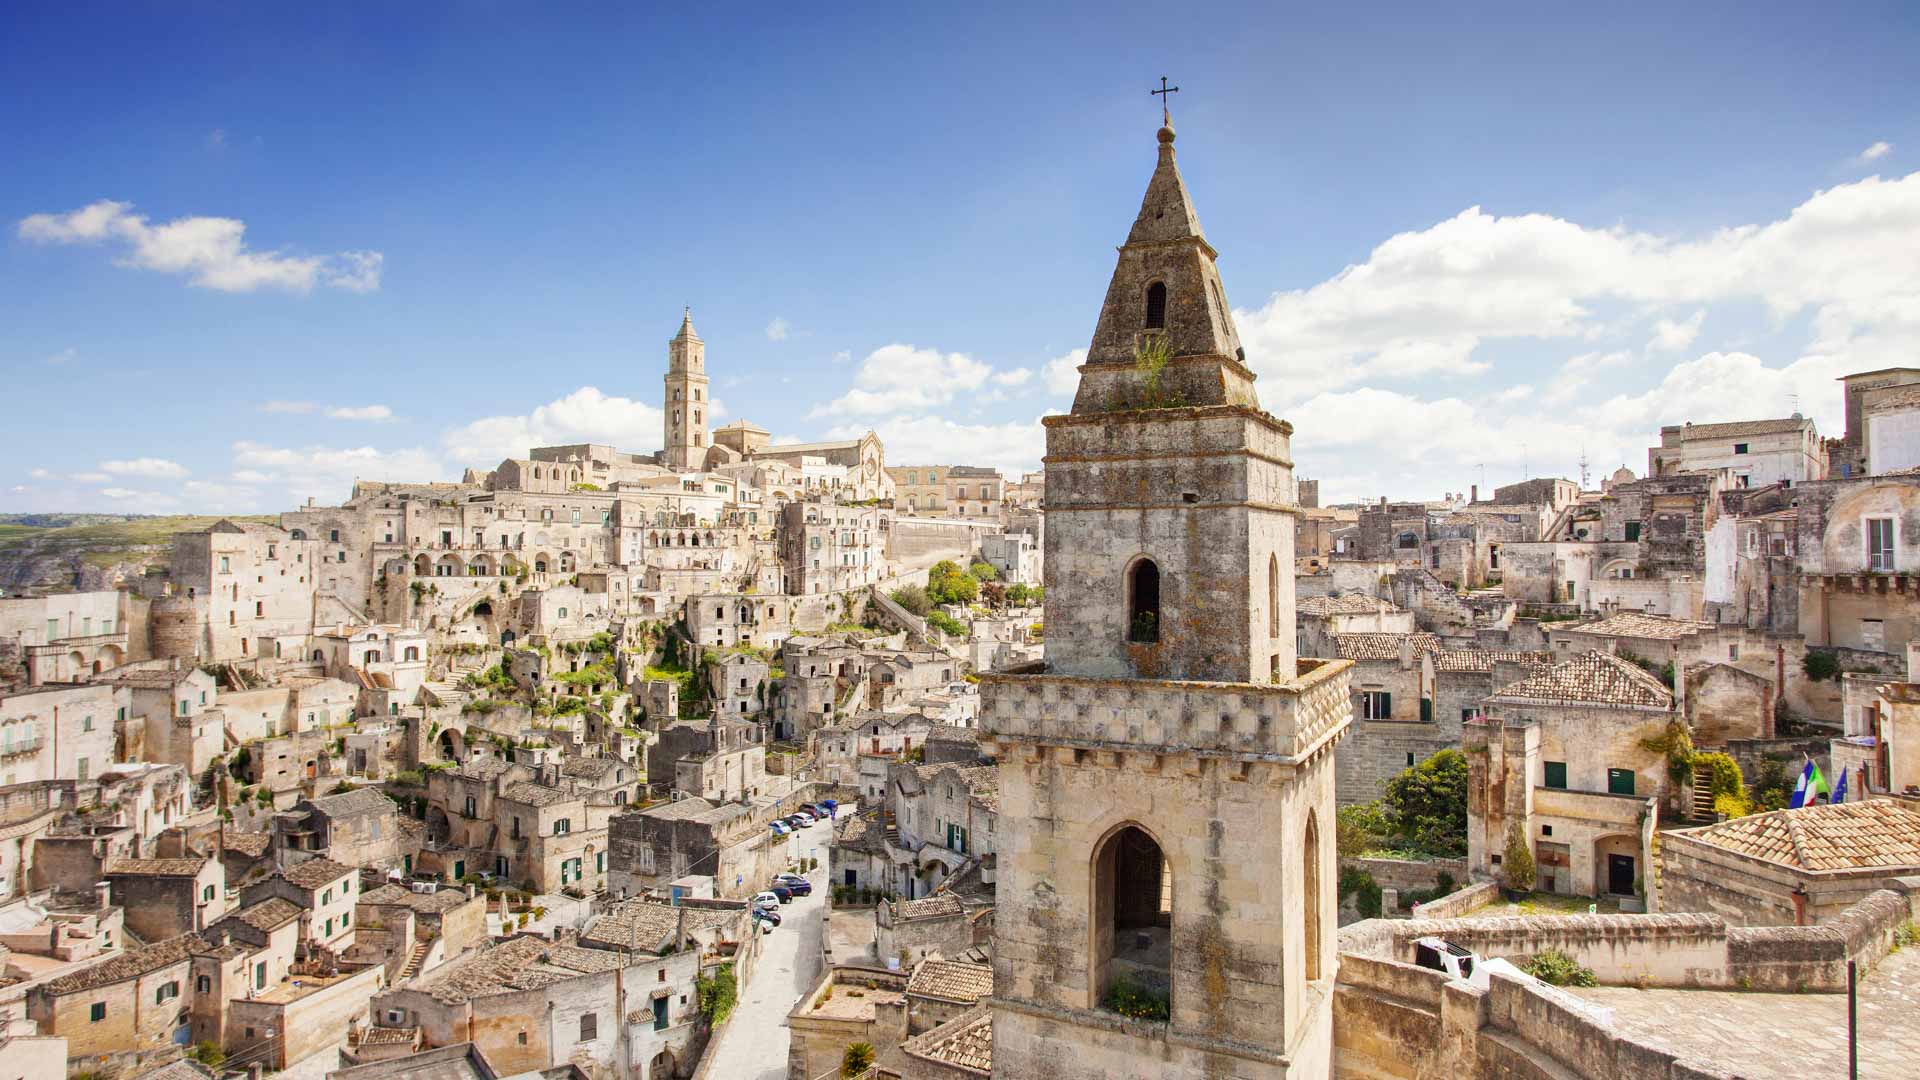 The old town section of Matera is a jumbled puzzle of stacked homes and businesses built into the side of a plateau. The town is a uniform light brown dotted with bright green trees and the occasional flag.